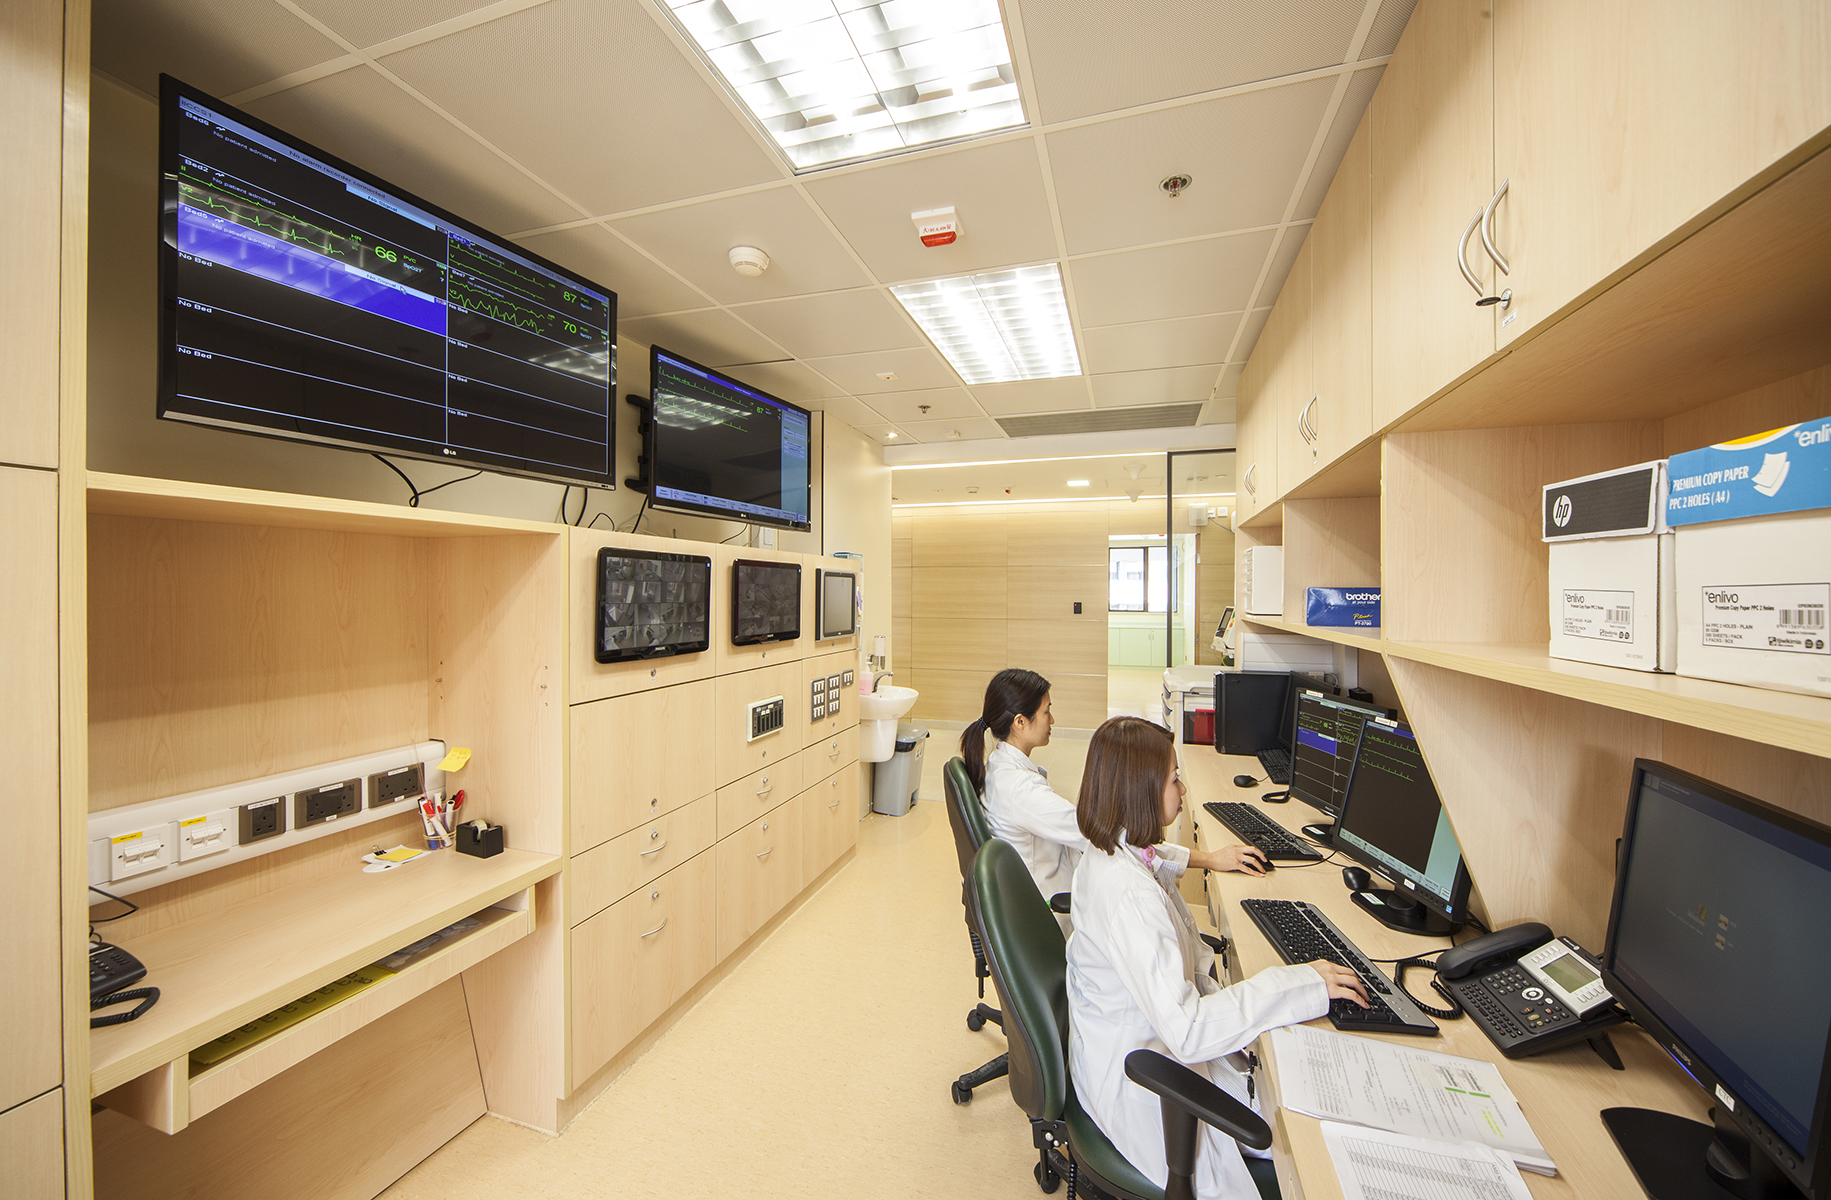 Located at 11EF in the Prince of Wales Hospital, the CUHK Phase I Clinical Trial Centre is equipped with 36-bed inpatient facility and mobile medical monitoring and surveillance that the study subjects can be observed from both nursing stations and staff common room to ensure patient safety.